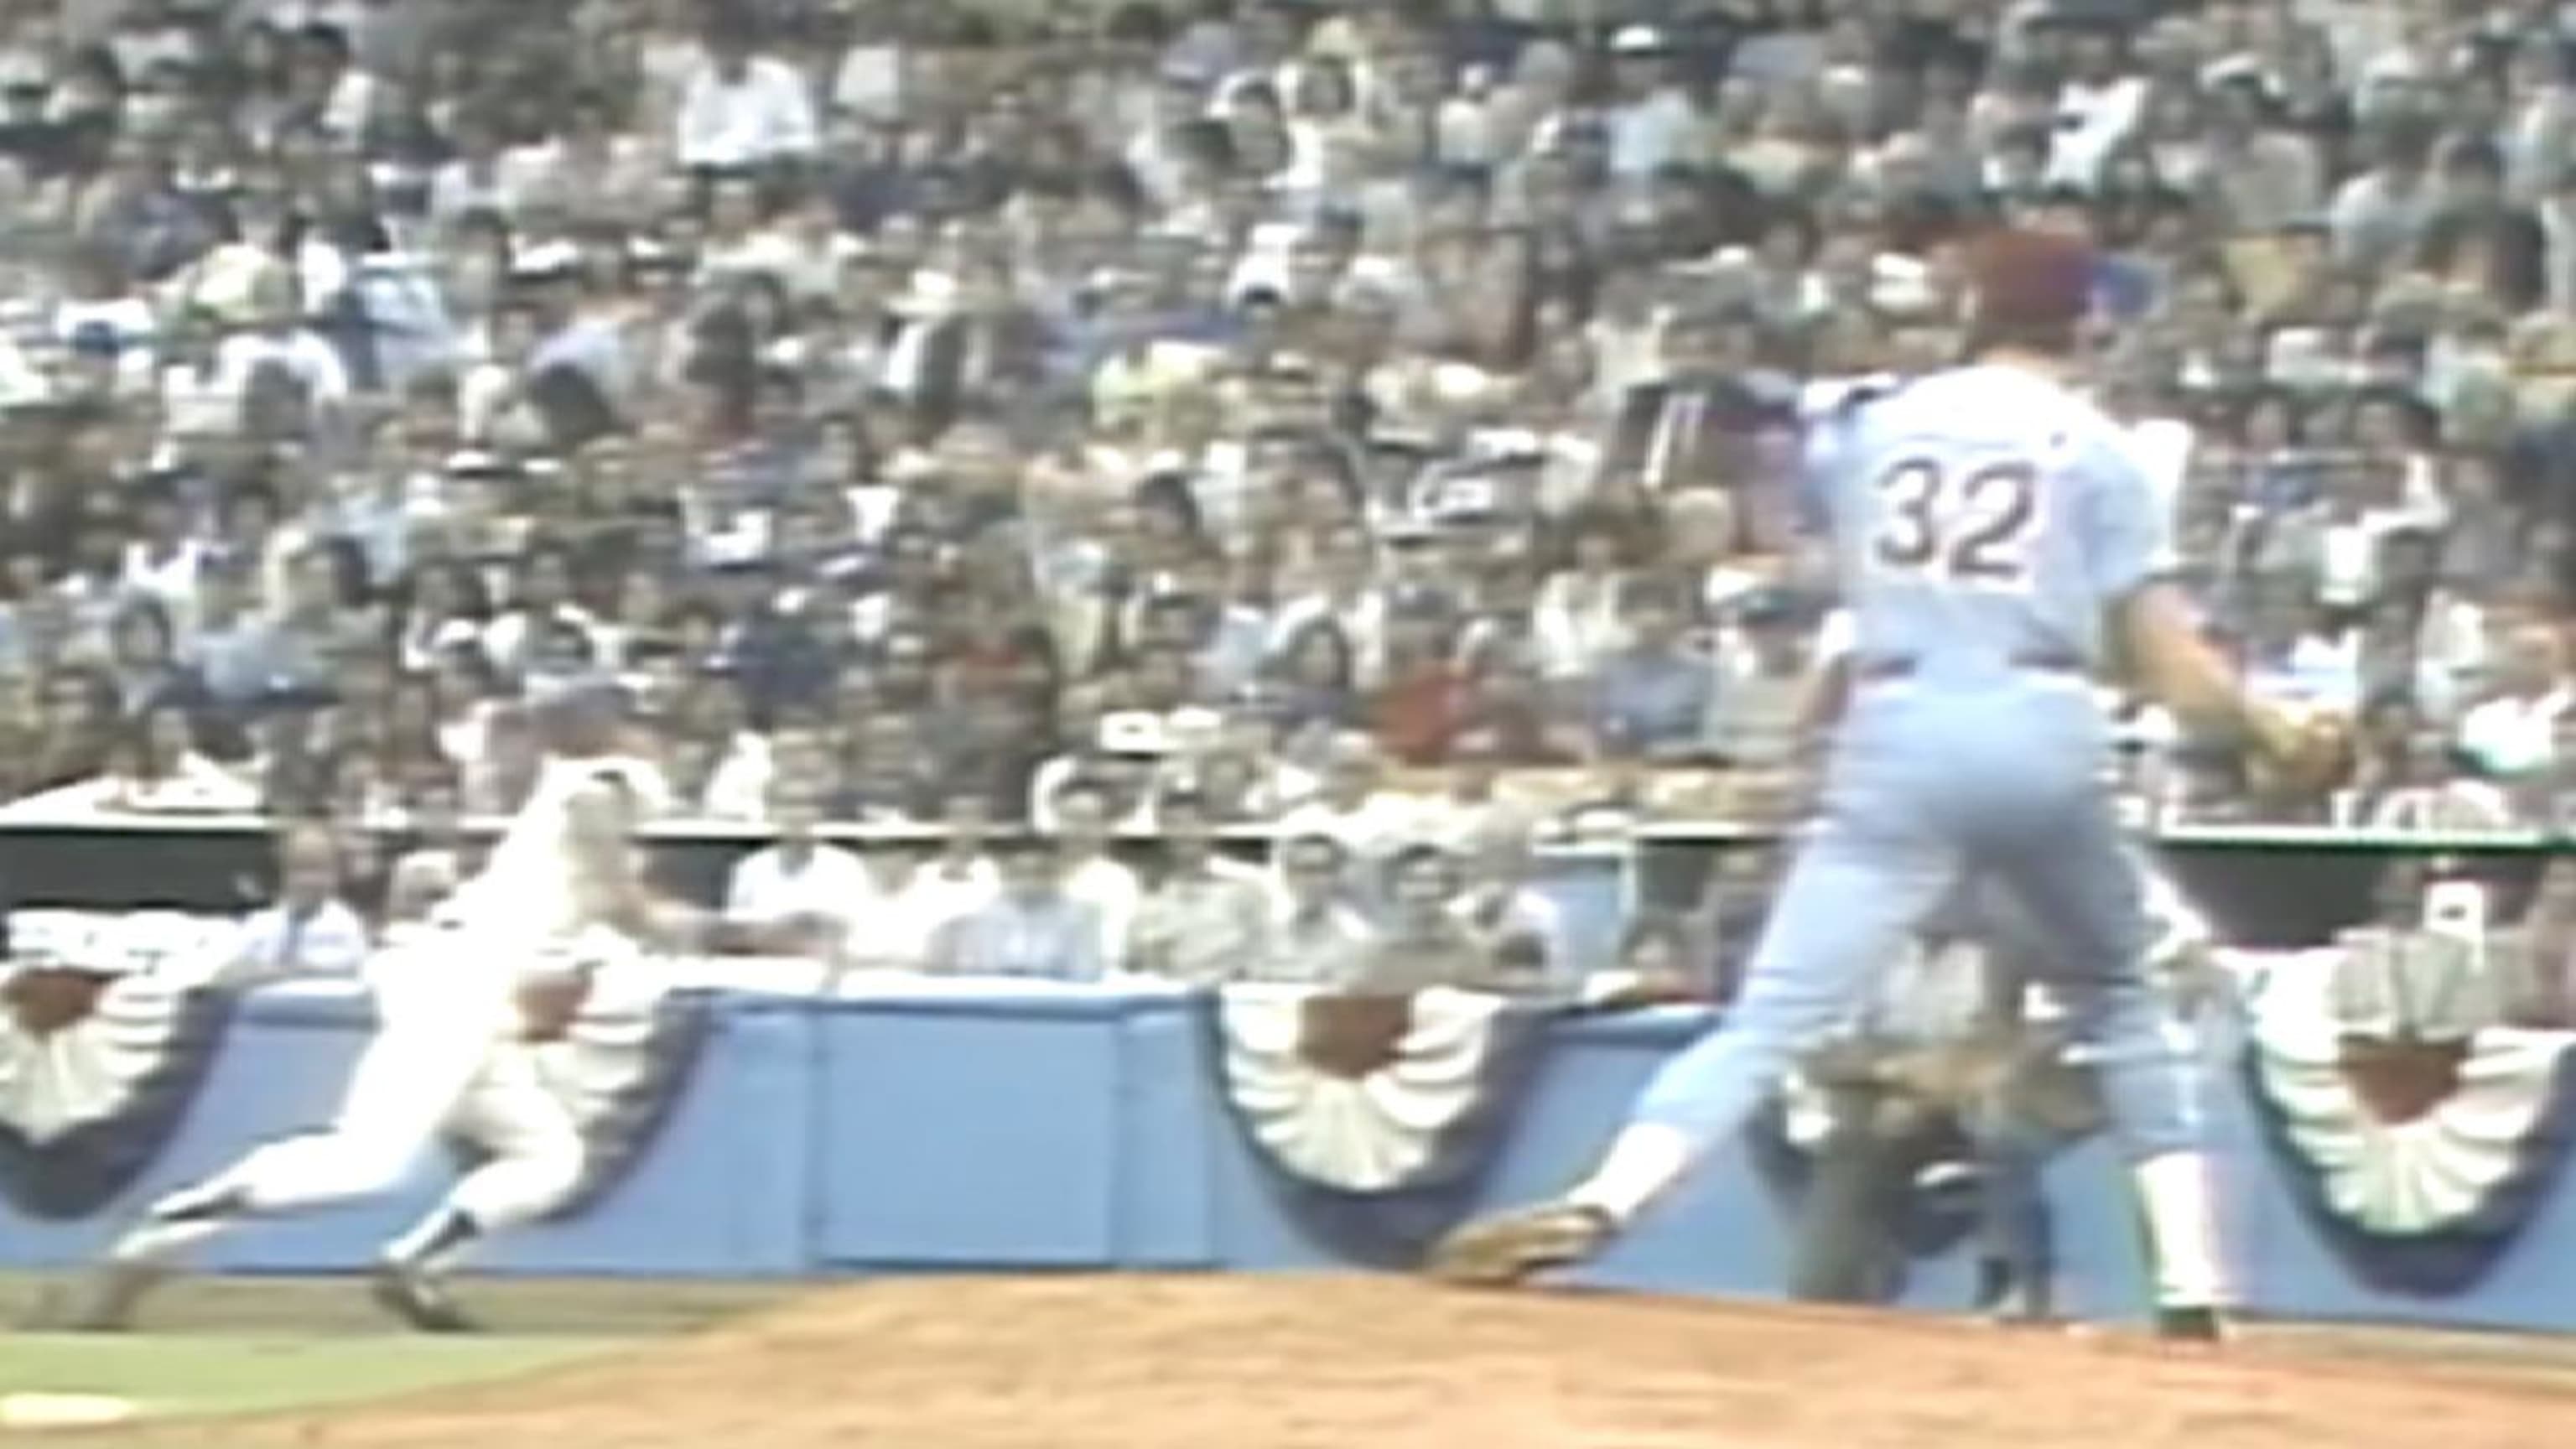 Steve Carlton's Hall of Fame career! Some of his top moments from